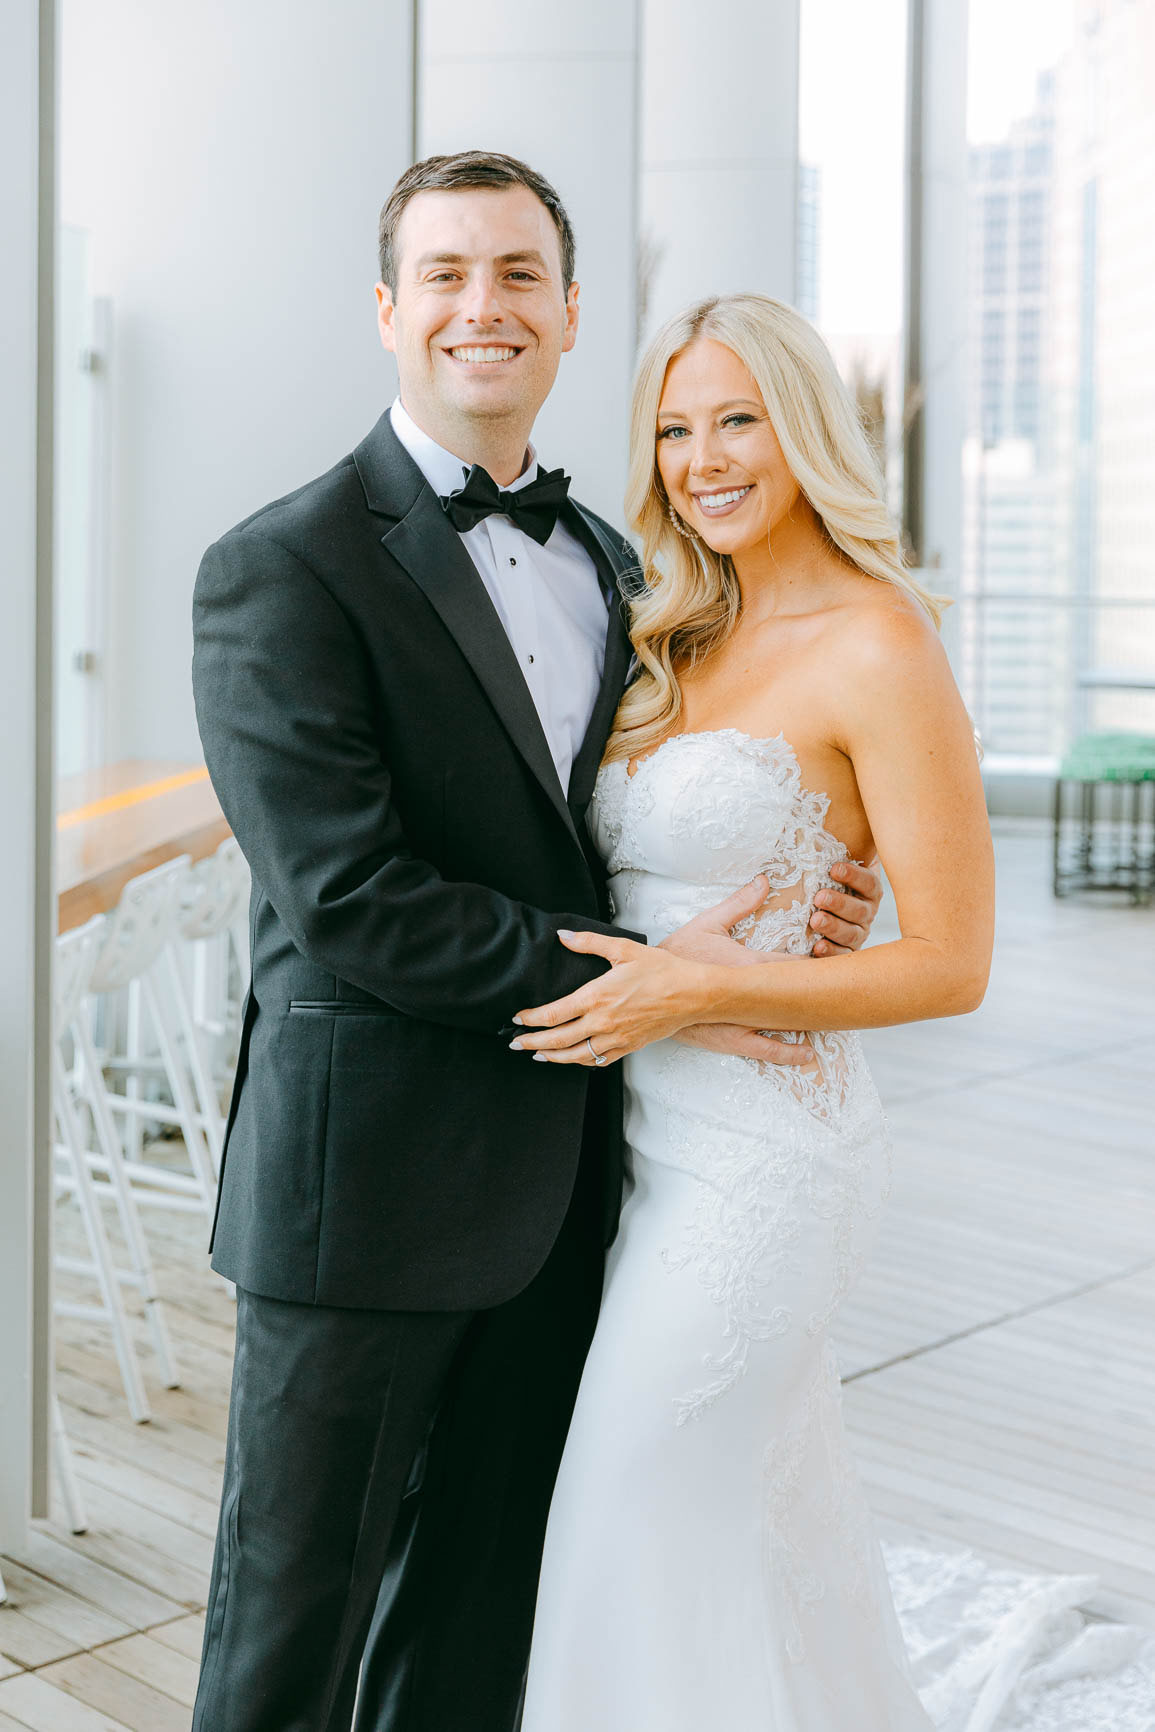 classic bride and groom portraits in uptown Charlotte nc shot by Nhieu Tang Photography | nhieutang.com